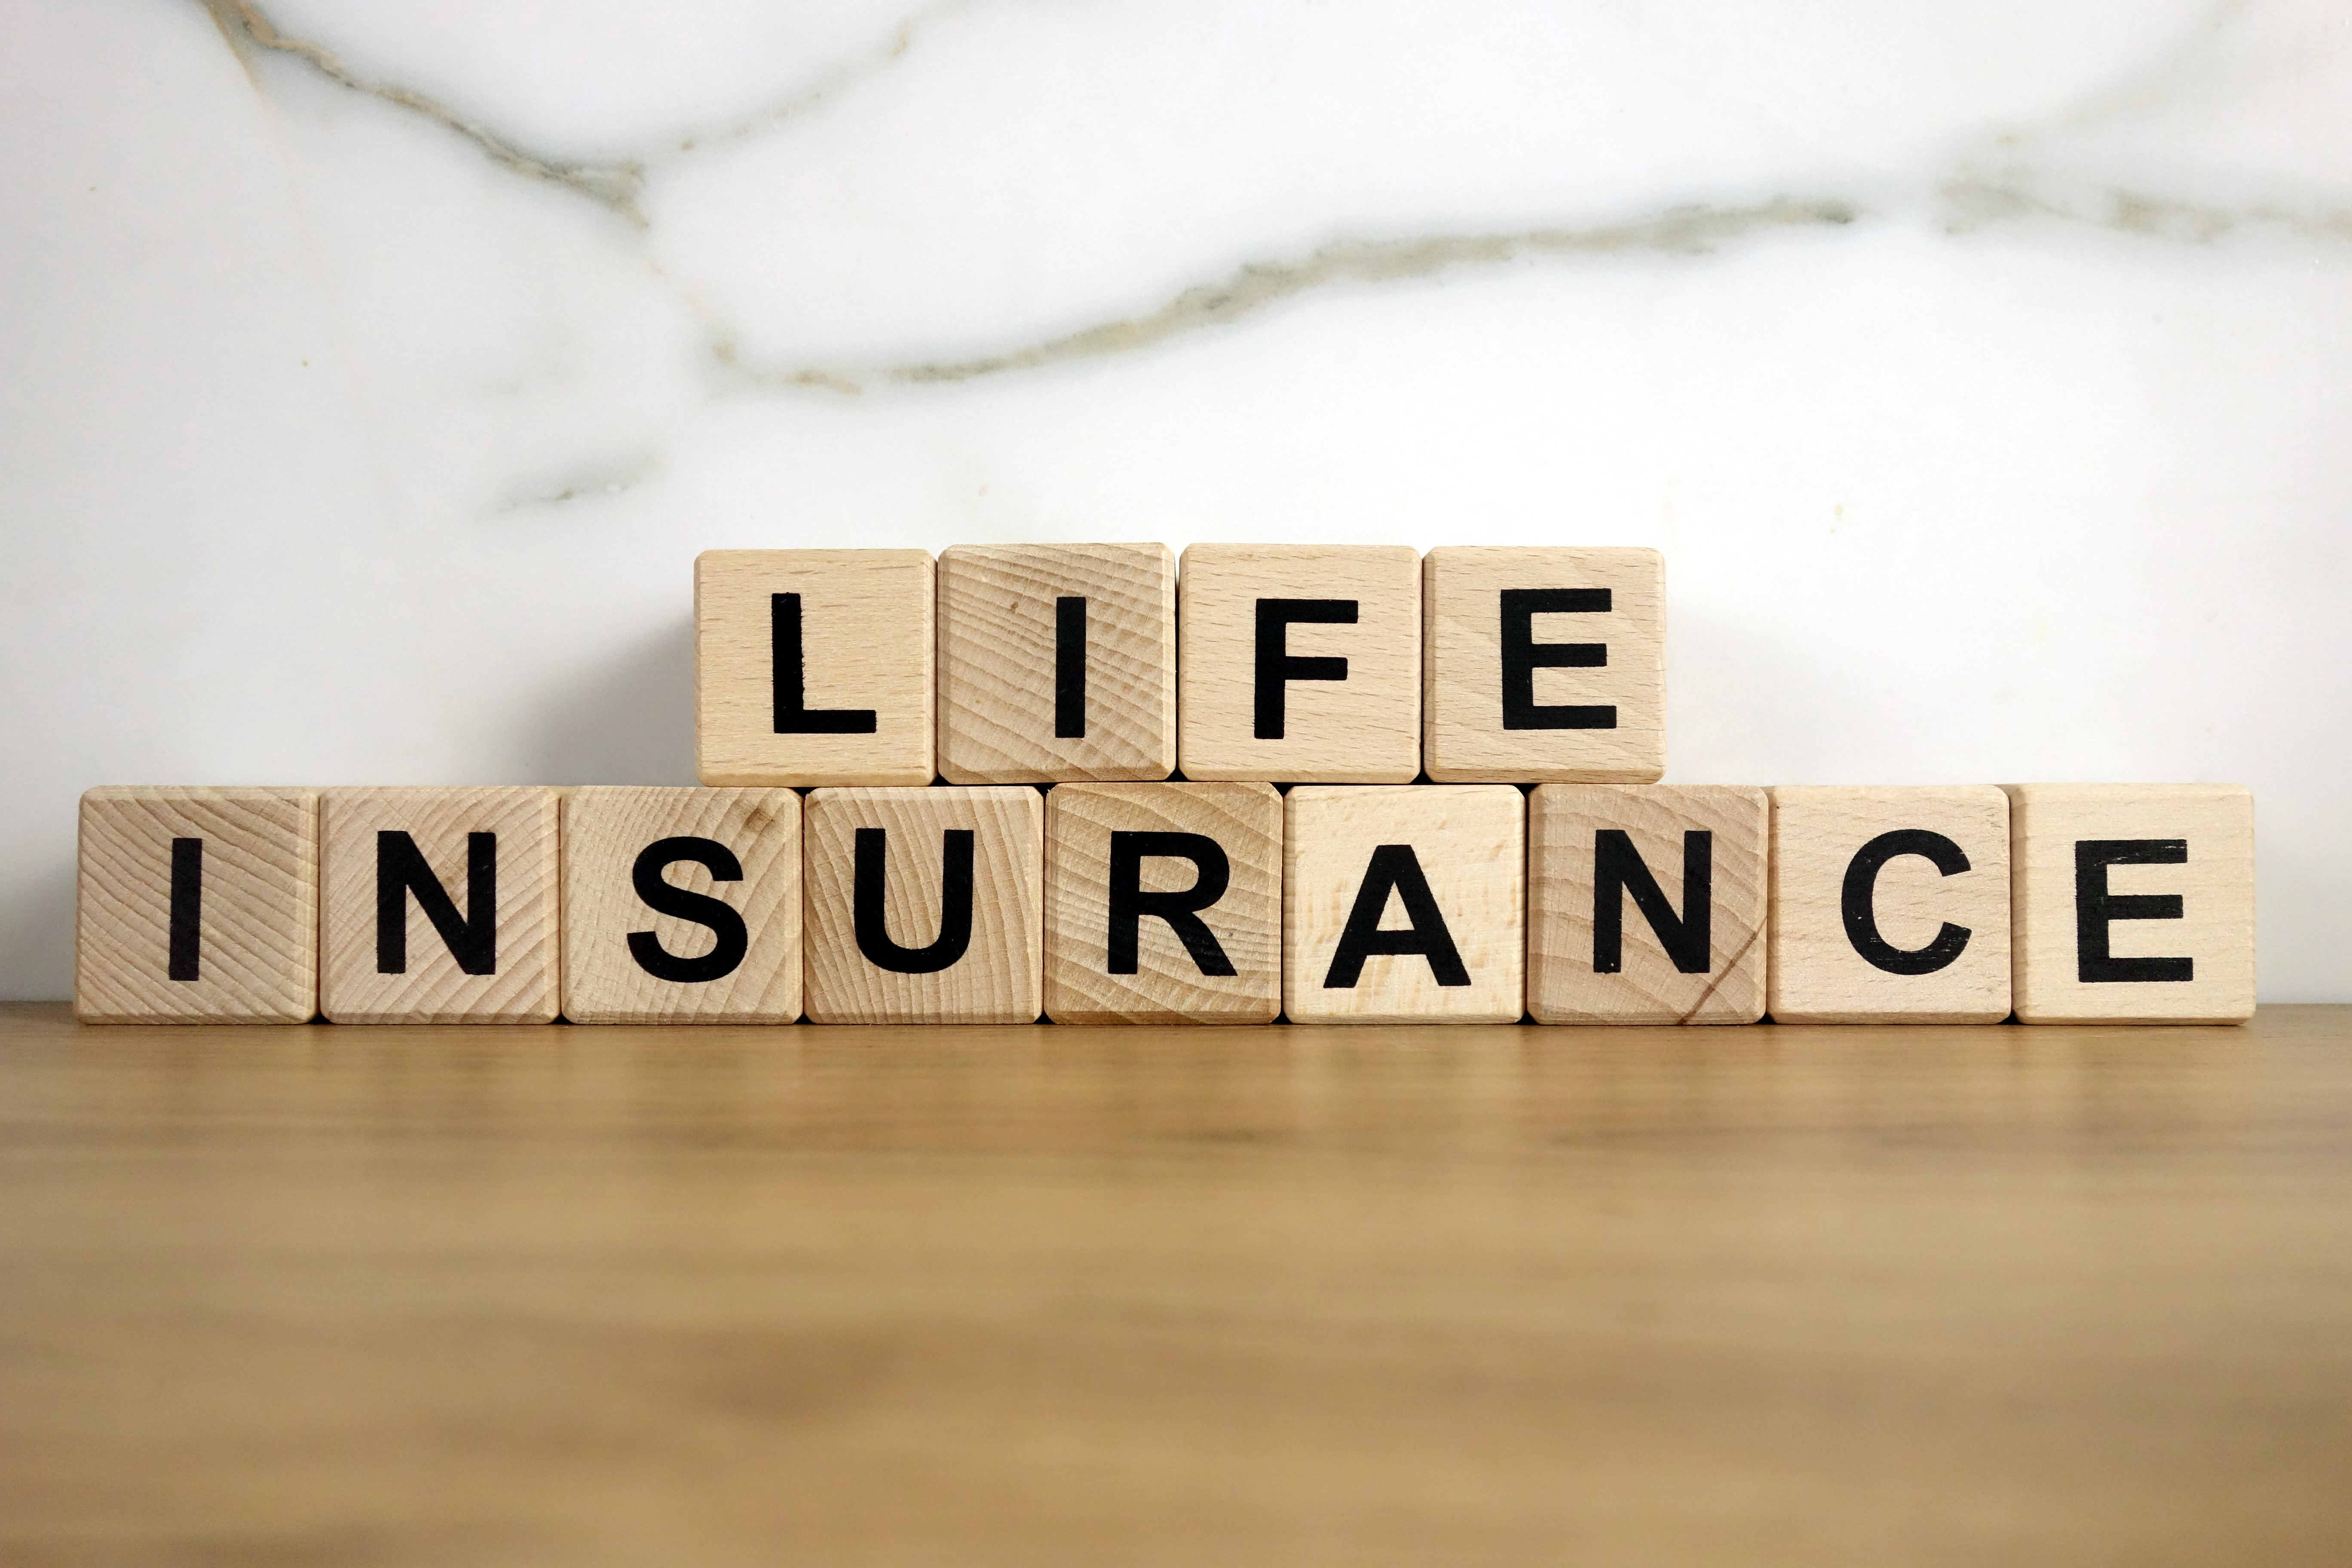 Over 50s life insurance: how to buy the best policy - Which?